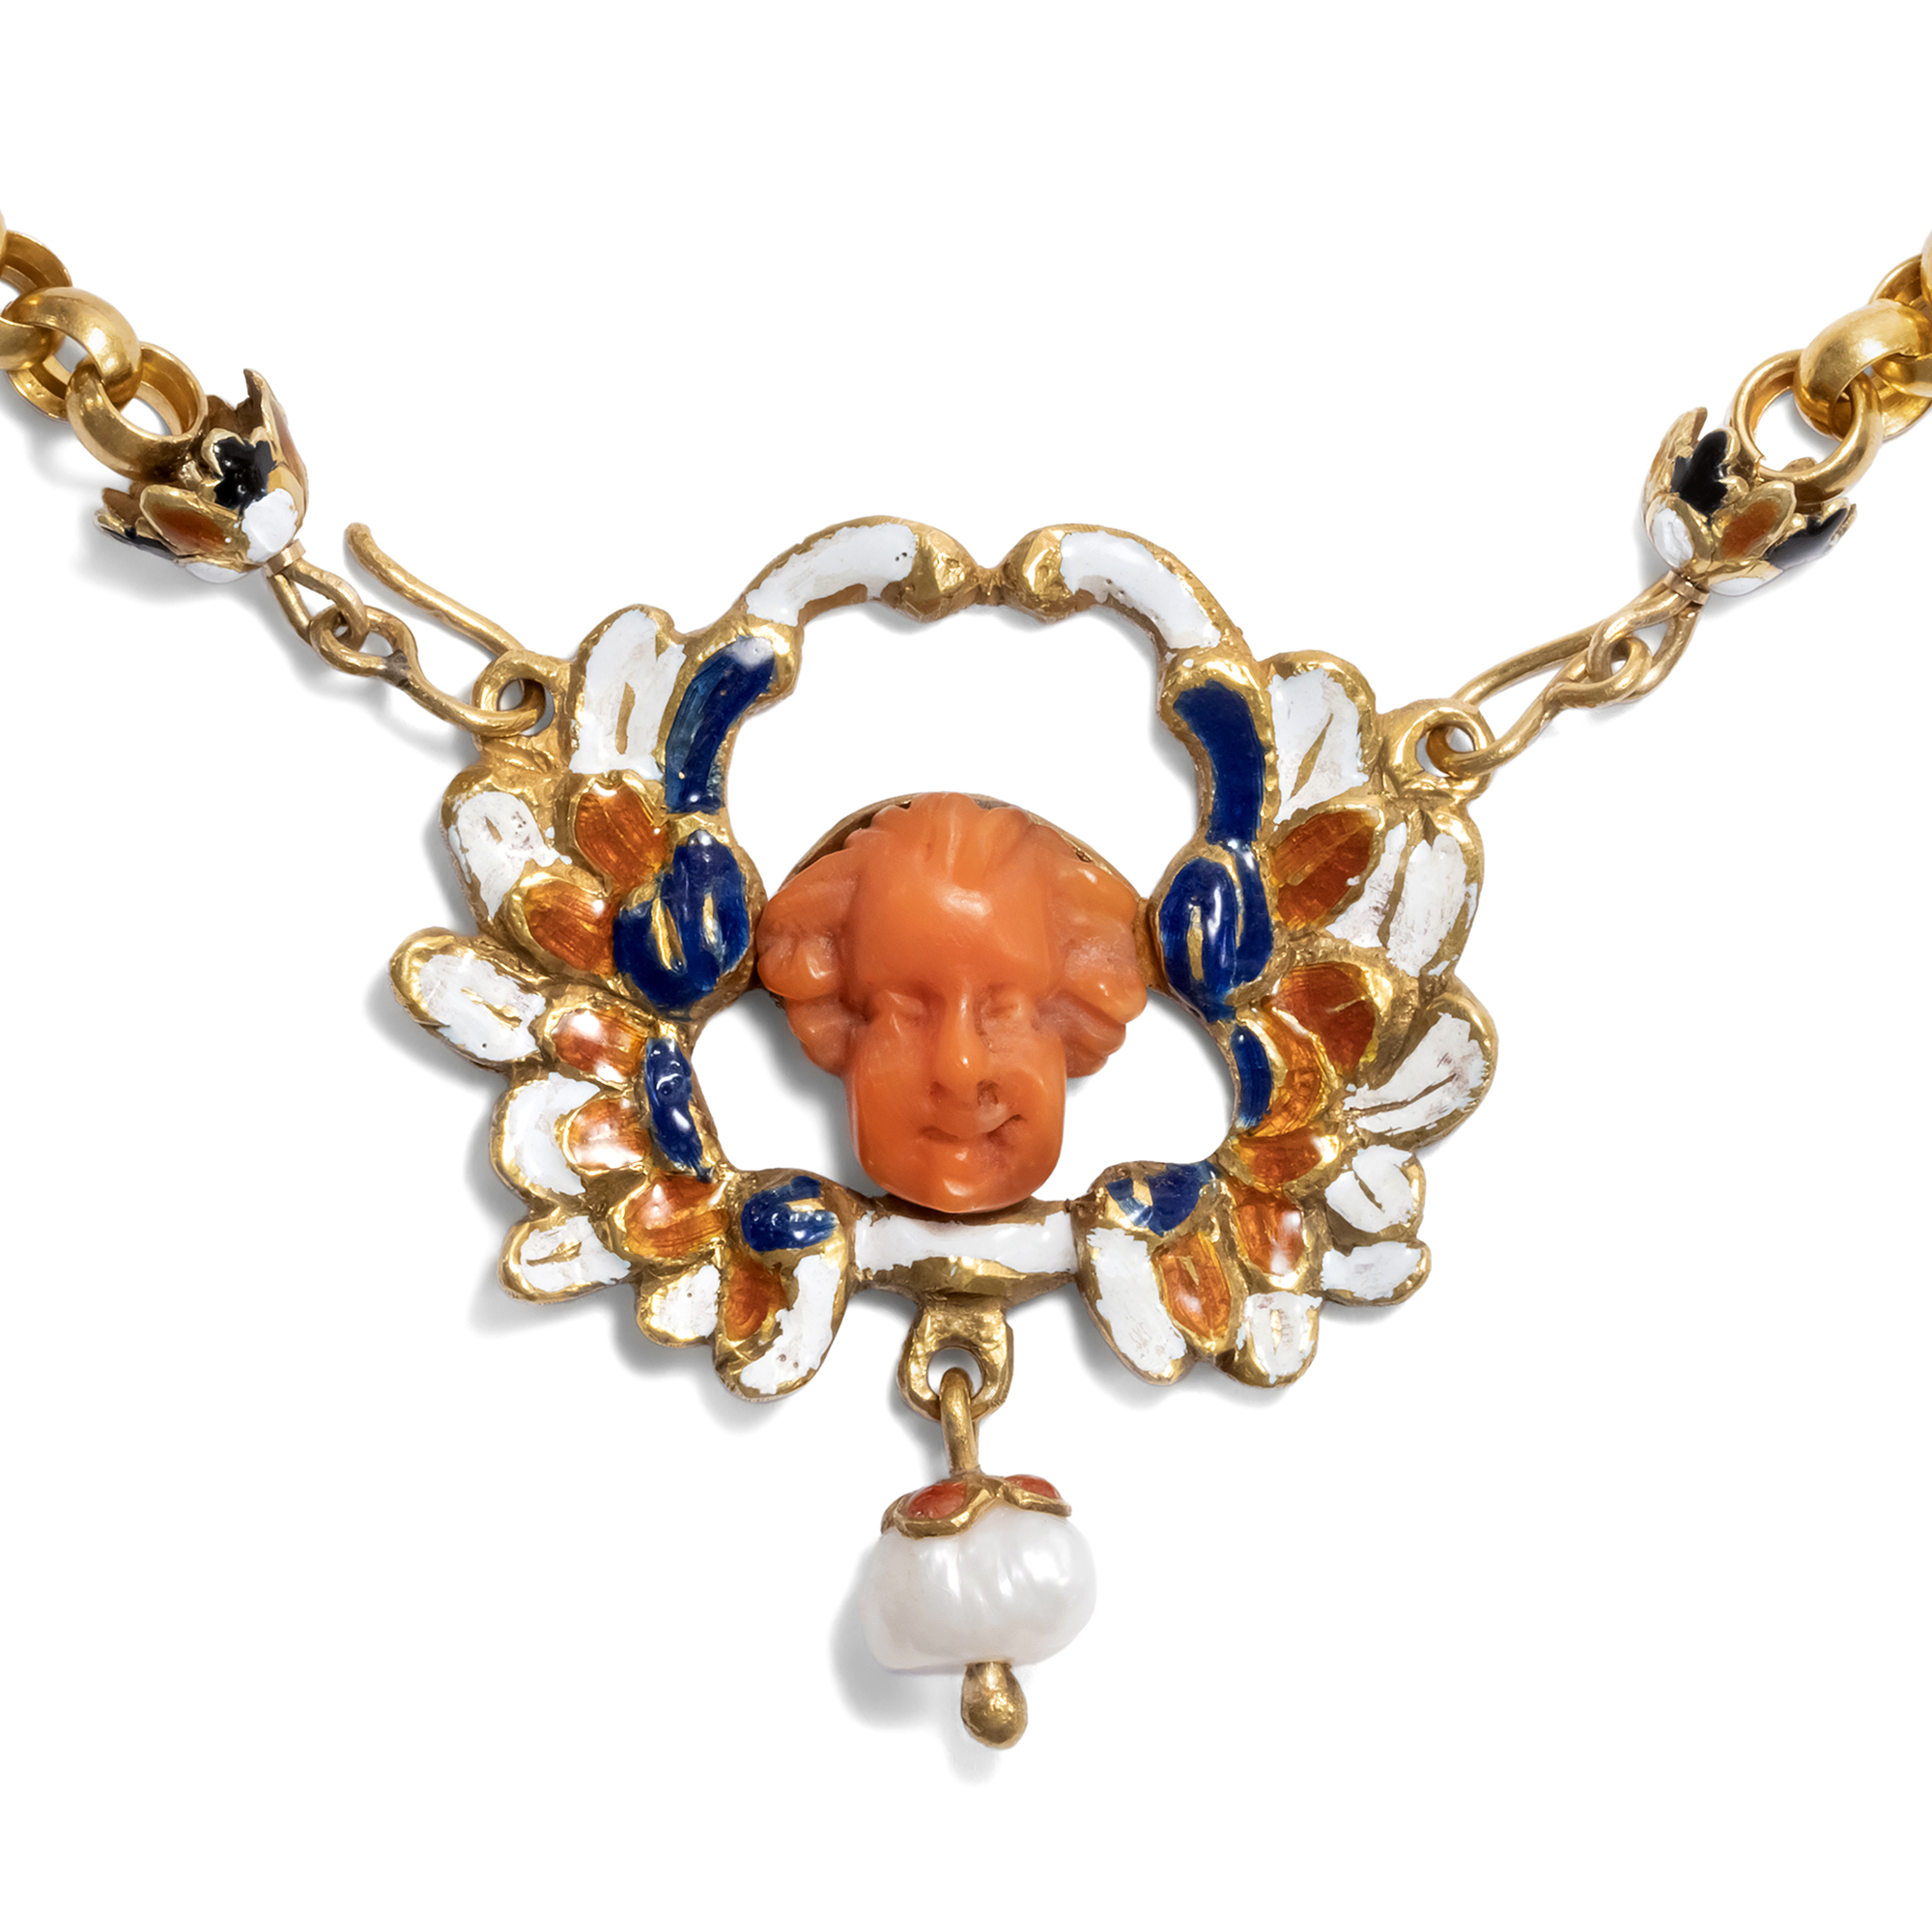 Rare Victorian Necklace with Coral Cameo & Enamel in Gold, ca. 1870